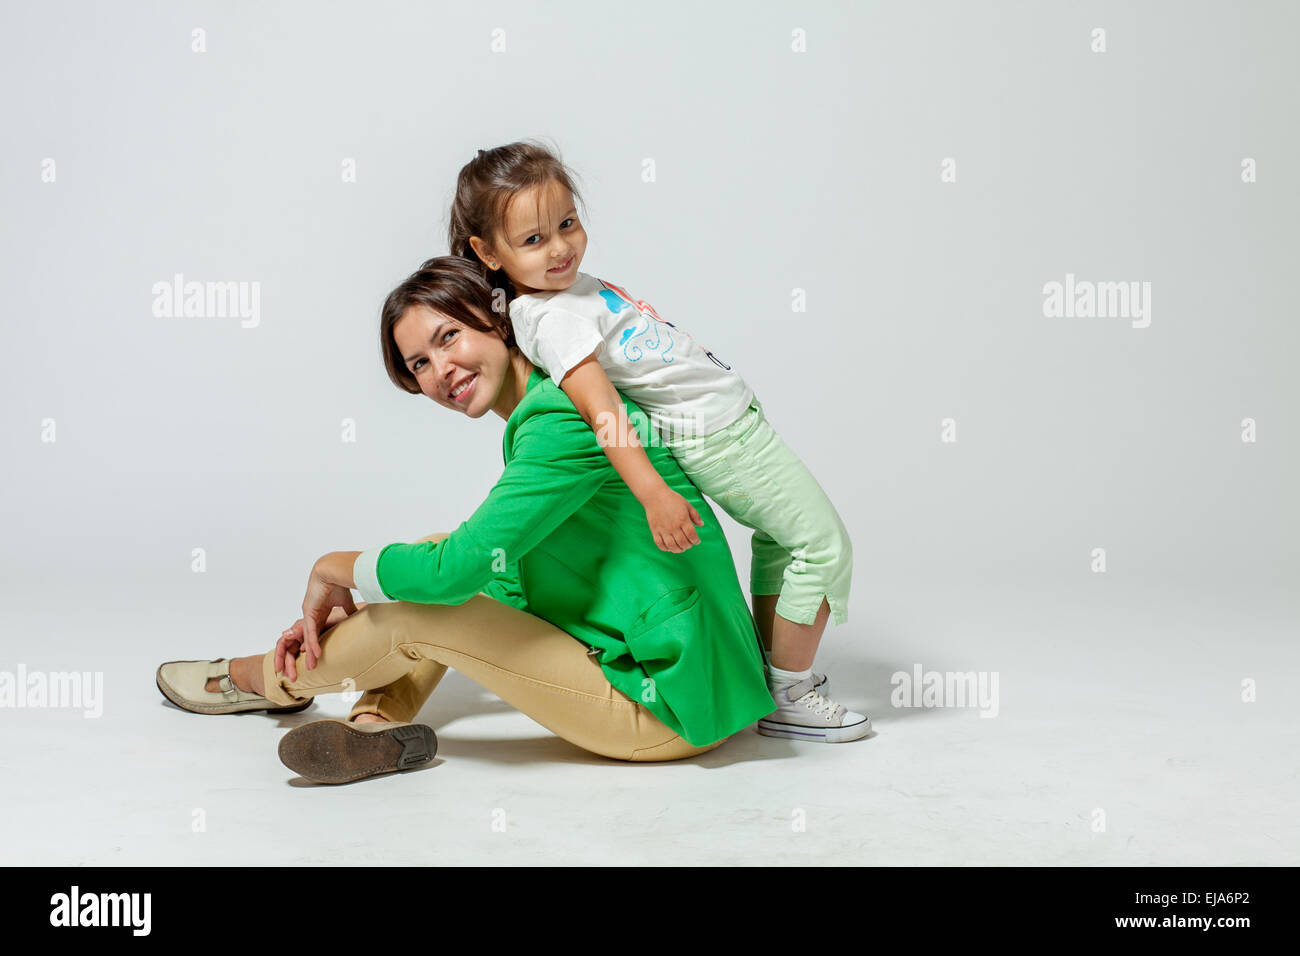 daughter leaning on mom Stock Photo